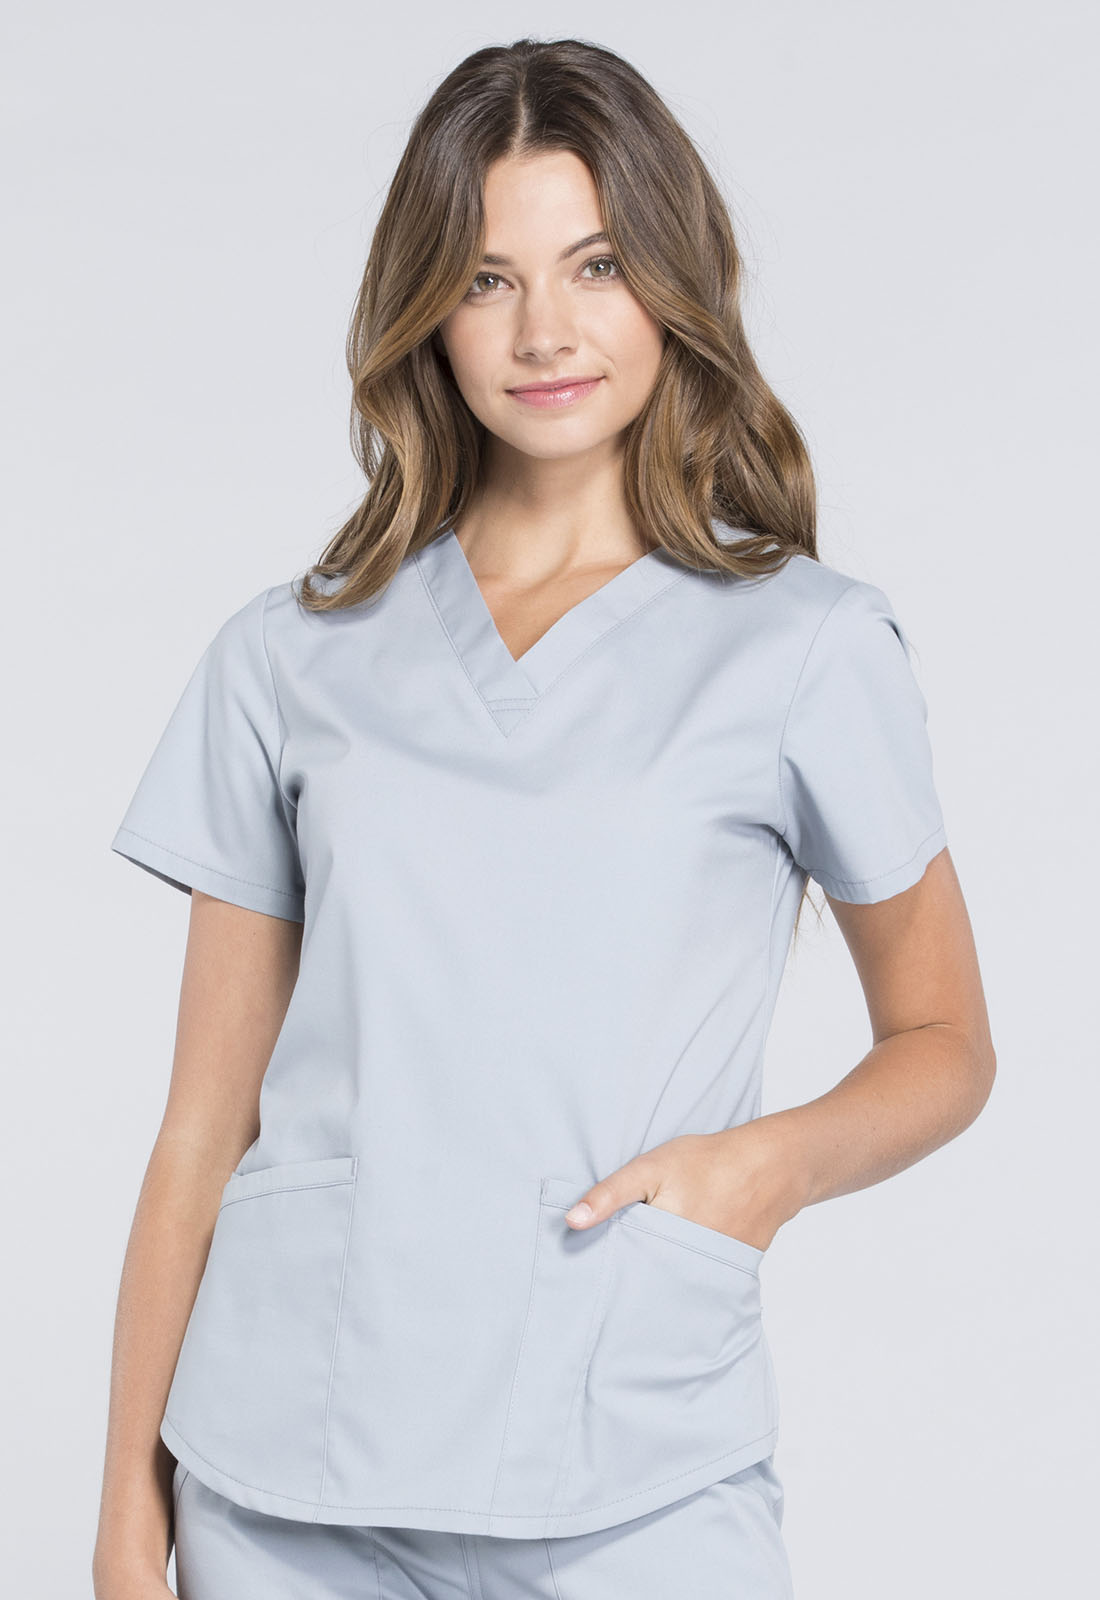 Details about   Scrubs Cherokee Workwear Professionals V Neck Top WW665 BLK Black Free Shipping 